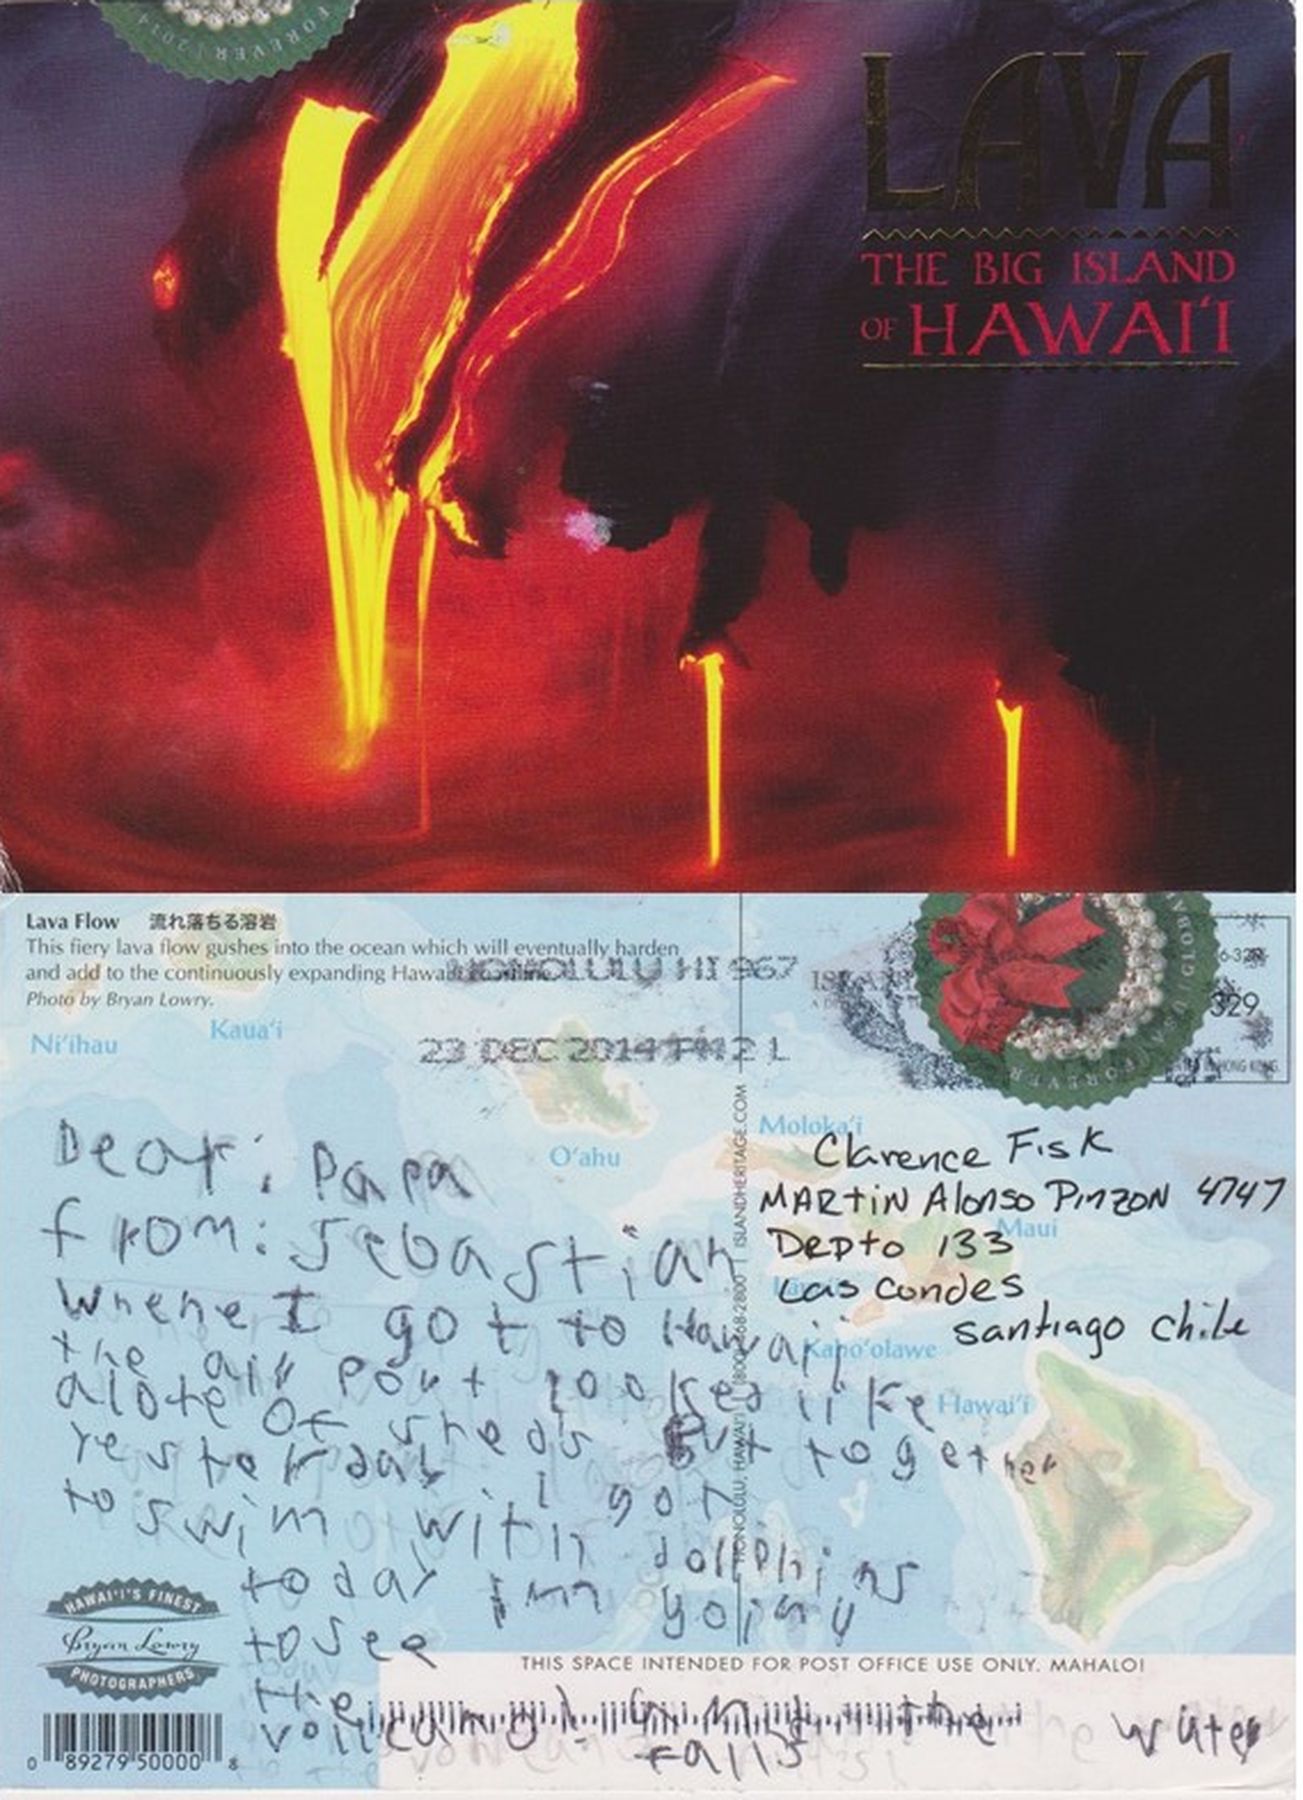 {}{<> Clarence Alfred  Fisk Godoy};{[|] Post Cards from Grandchildren};{Lava};{Sebastian};{eTg};{Papa};{Sebastian};{Hawaii};{Fred};{Today};{SIC};{Pappa};{@Place=Hawaii};{ USA};{@Author=Clarence Fisk ll};{[ATHR]Clarence Fisk ll